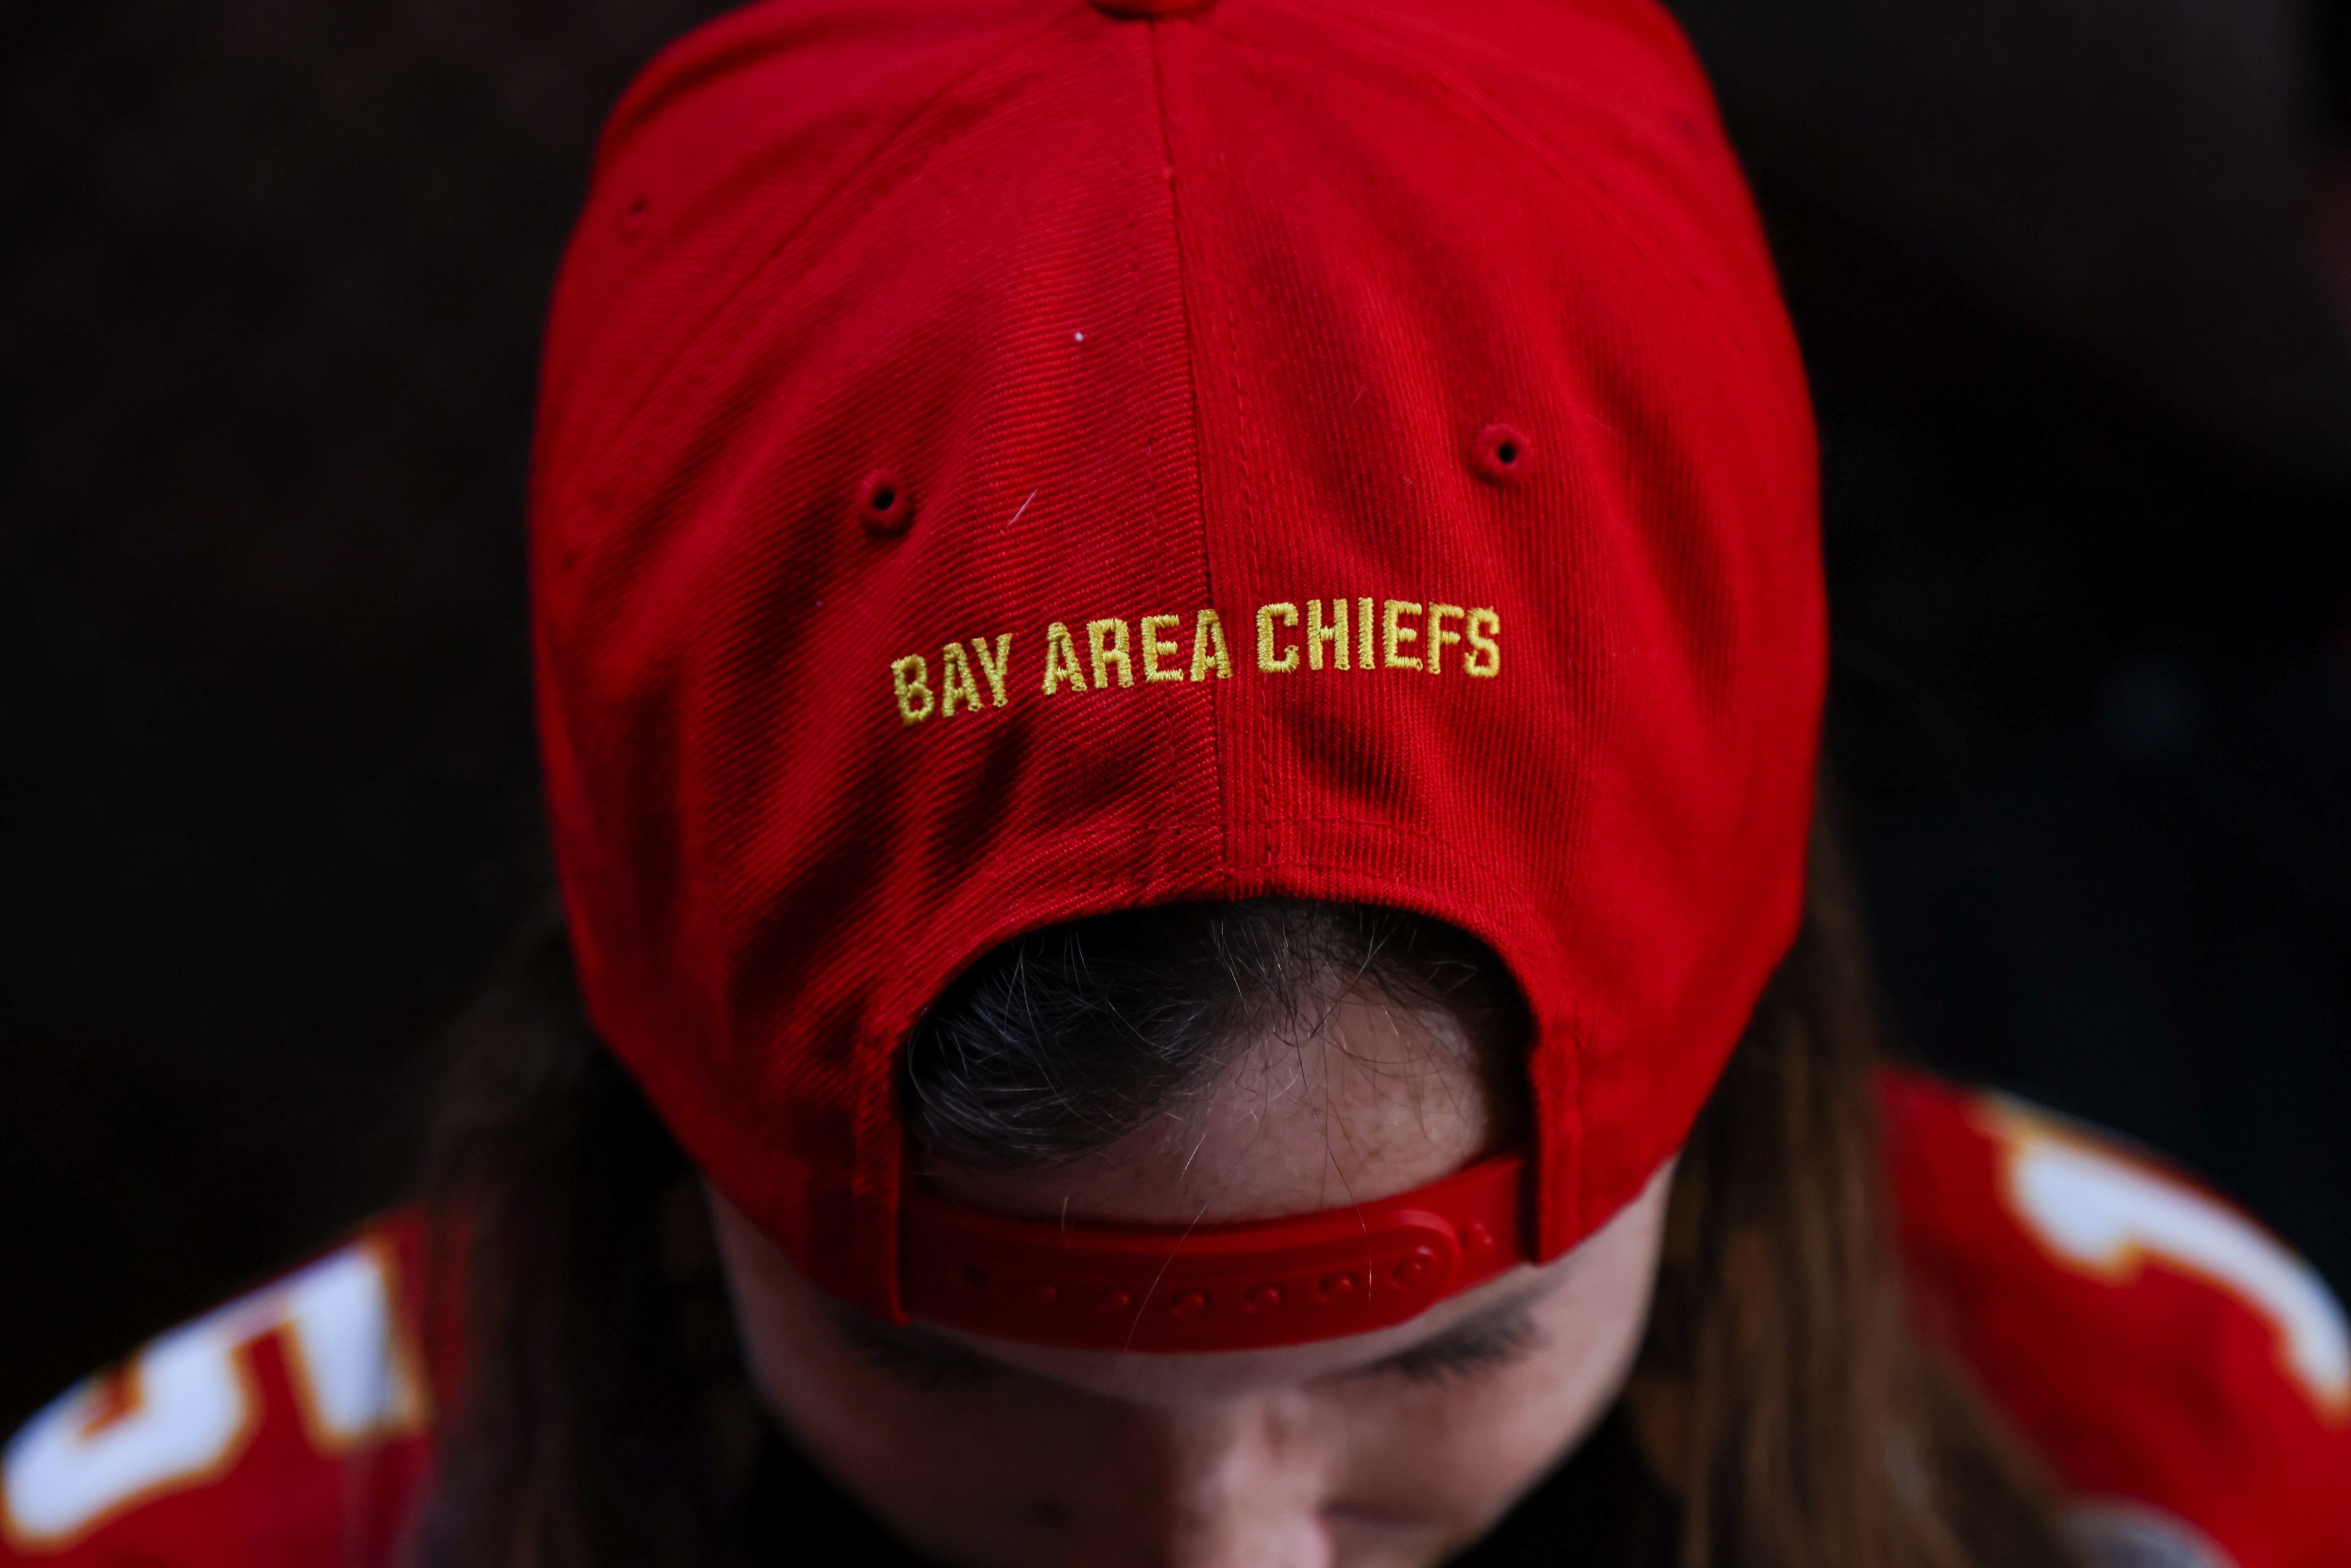 A fan shows off red baseball cap that says Bay Area Chiefs